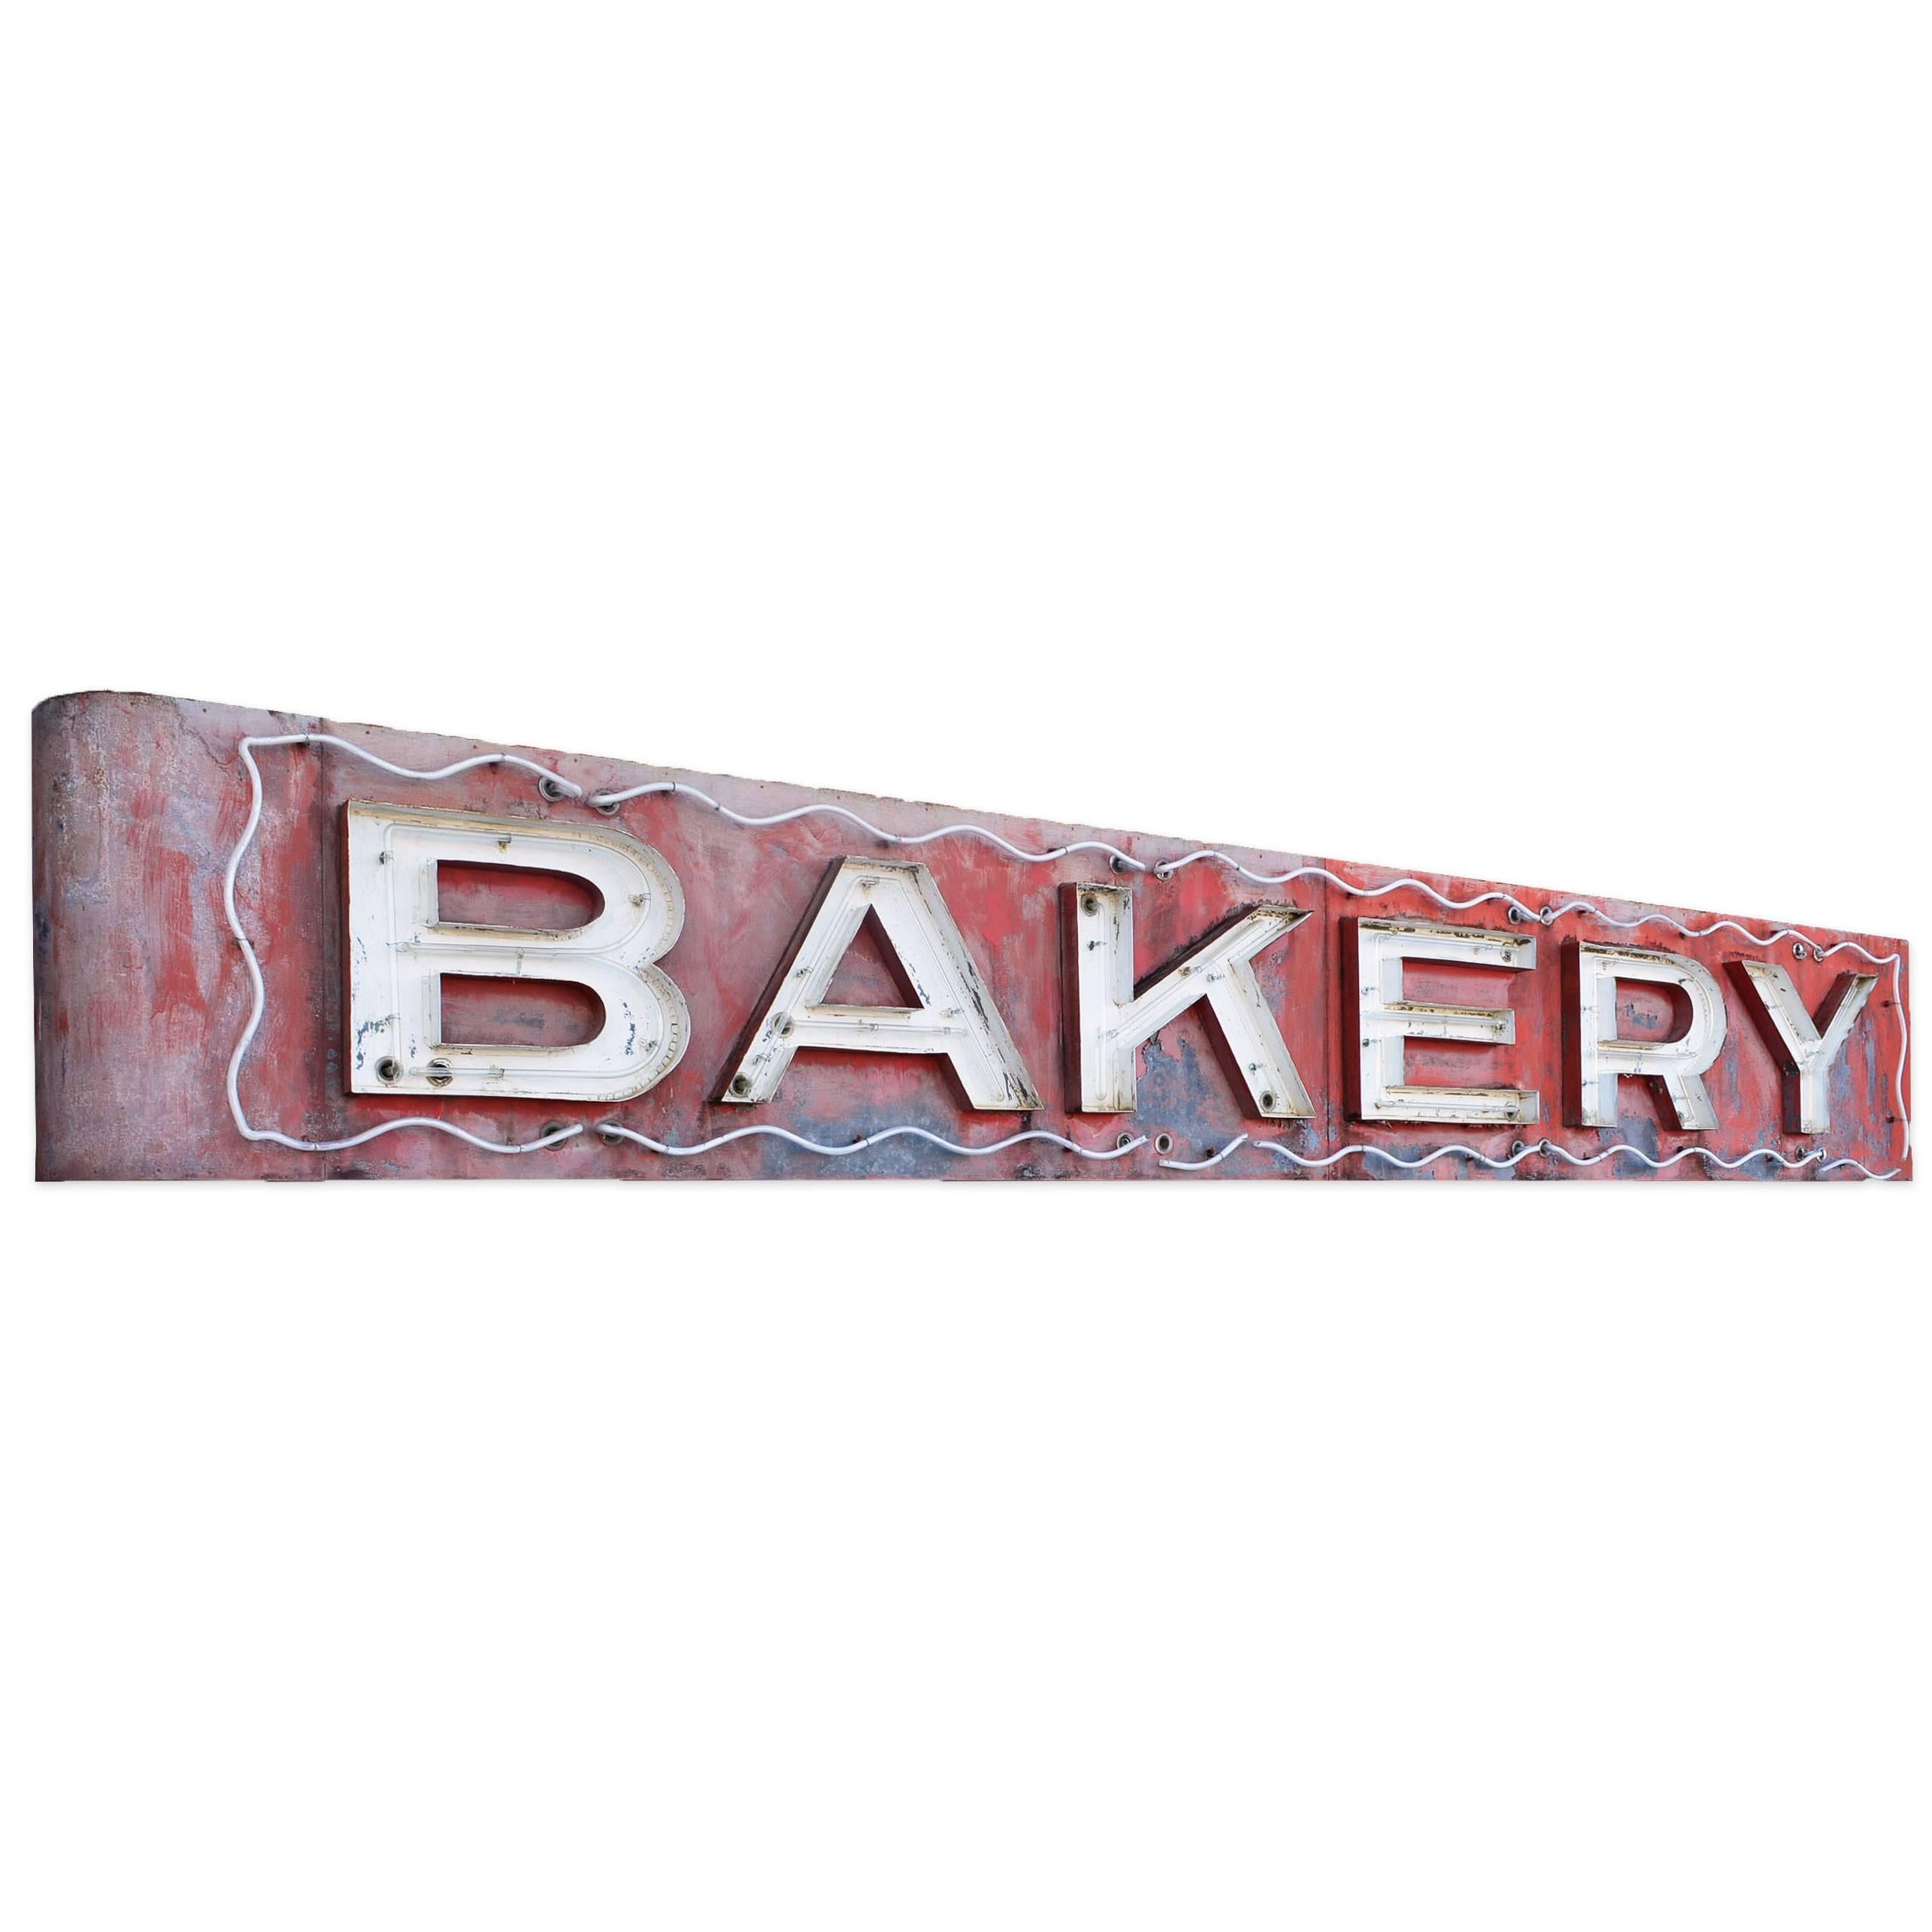 Enormous Vintage Neon Bakery Sign